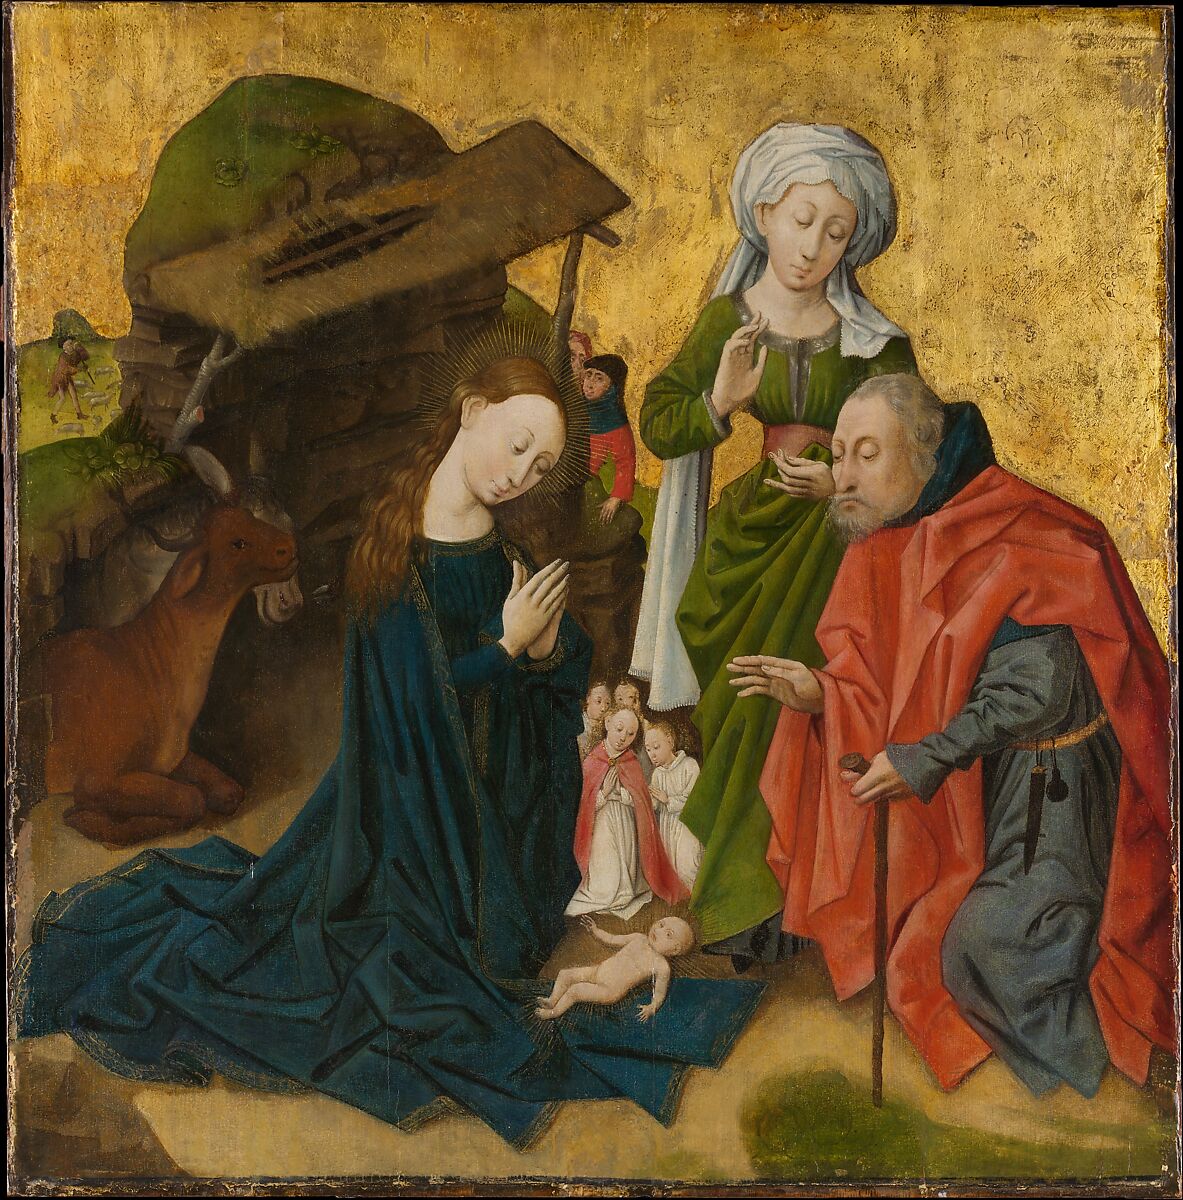 The Nativity, South Netherlandish Painter (ca. 1460), Oil on wood, gold ground 